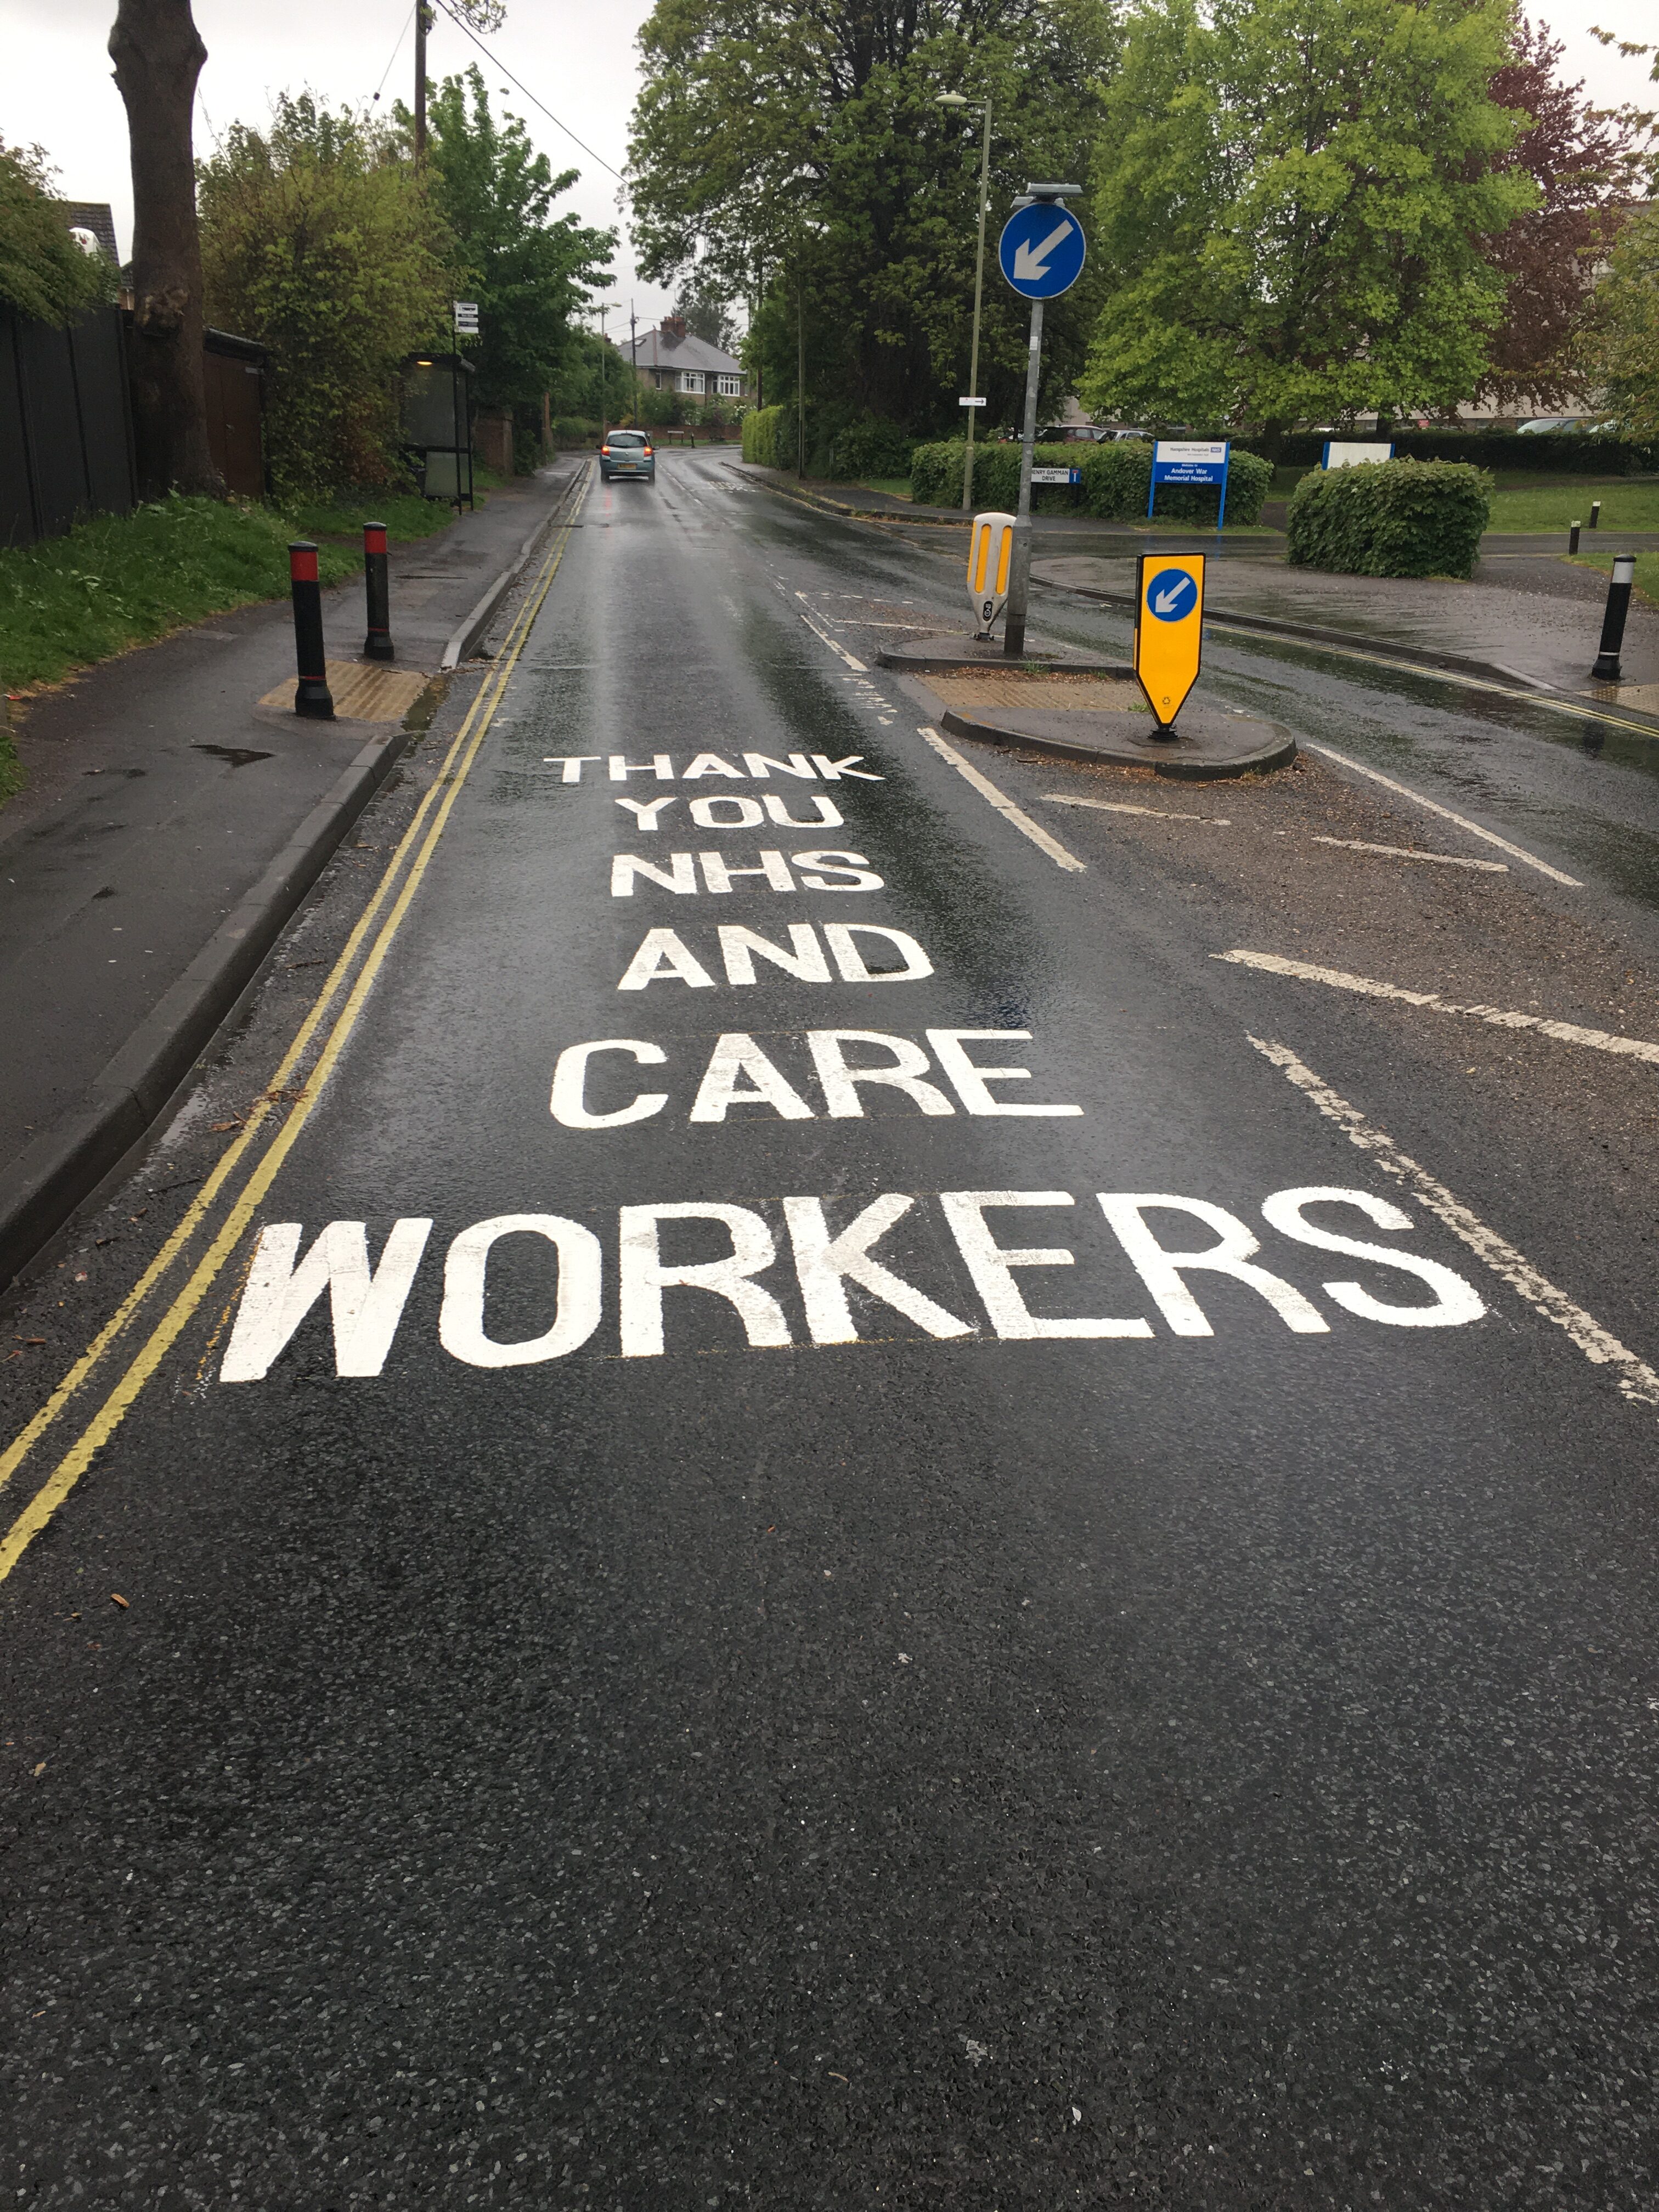 Thank you NHS and care workers painted on a road